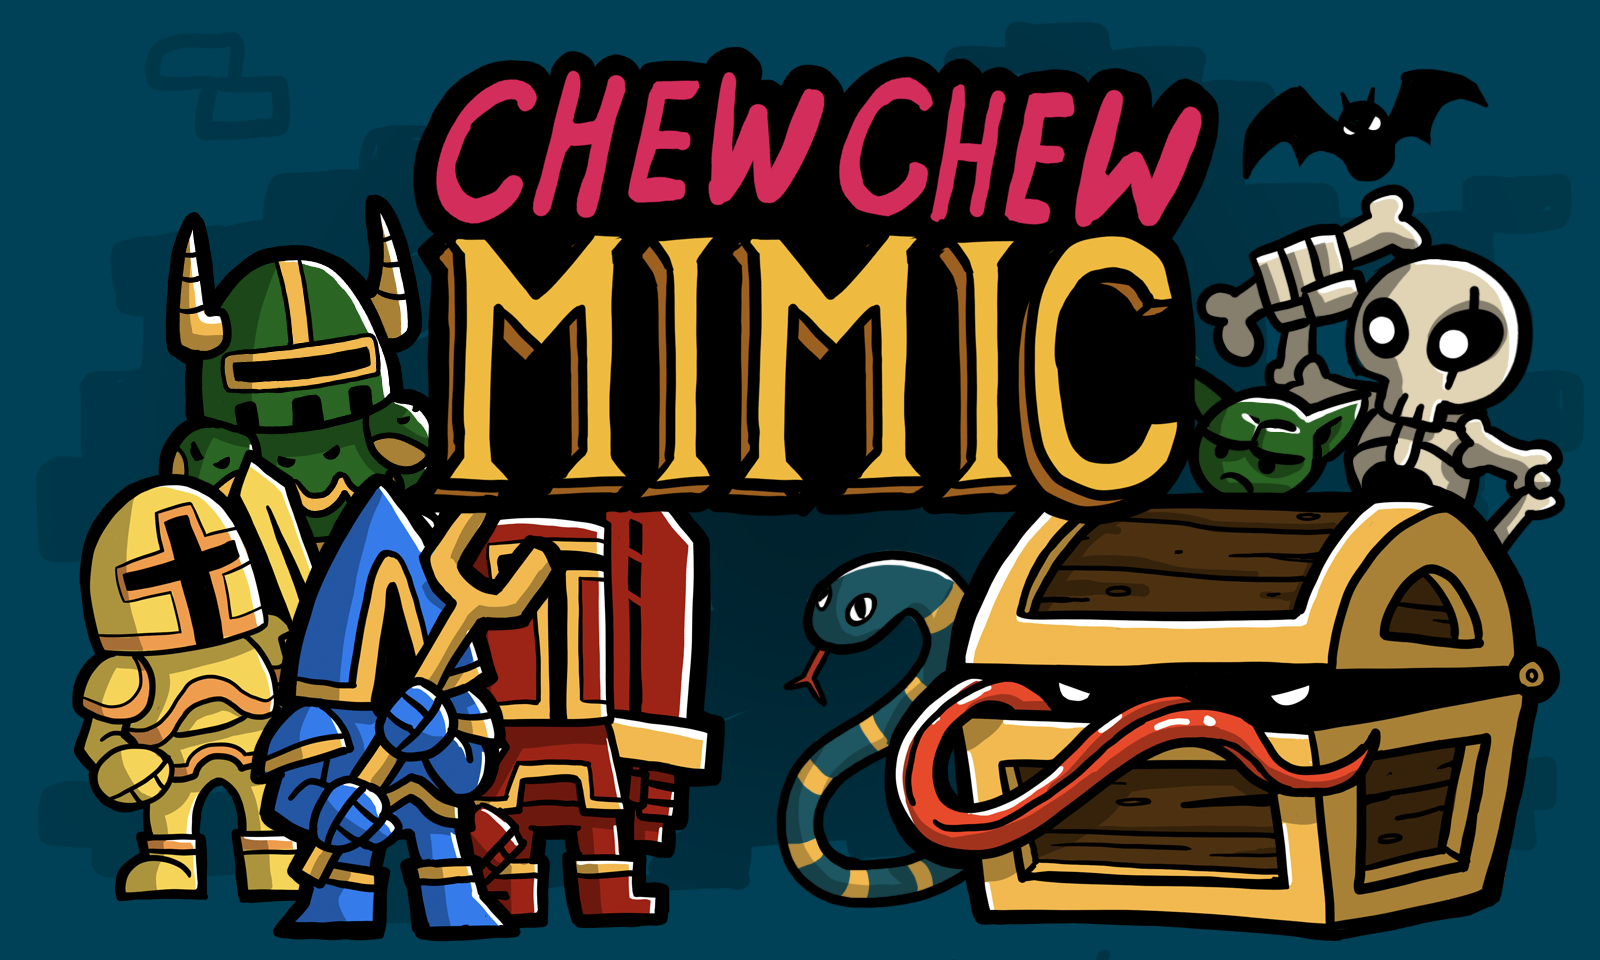 chewchewmimicbanner.png